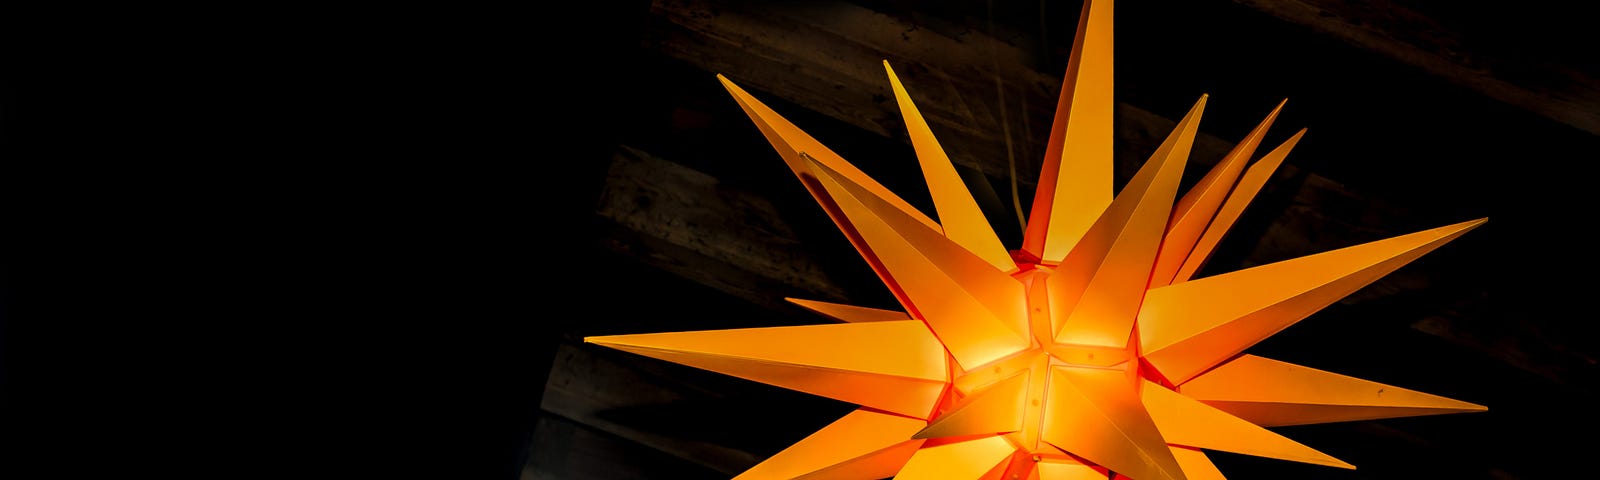 Multi-dimensional bright orange pointed star offset against a black background.